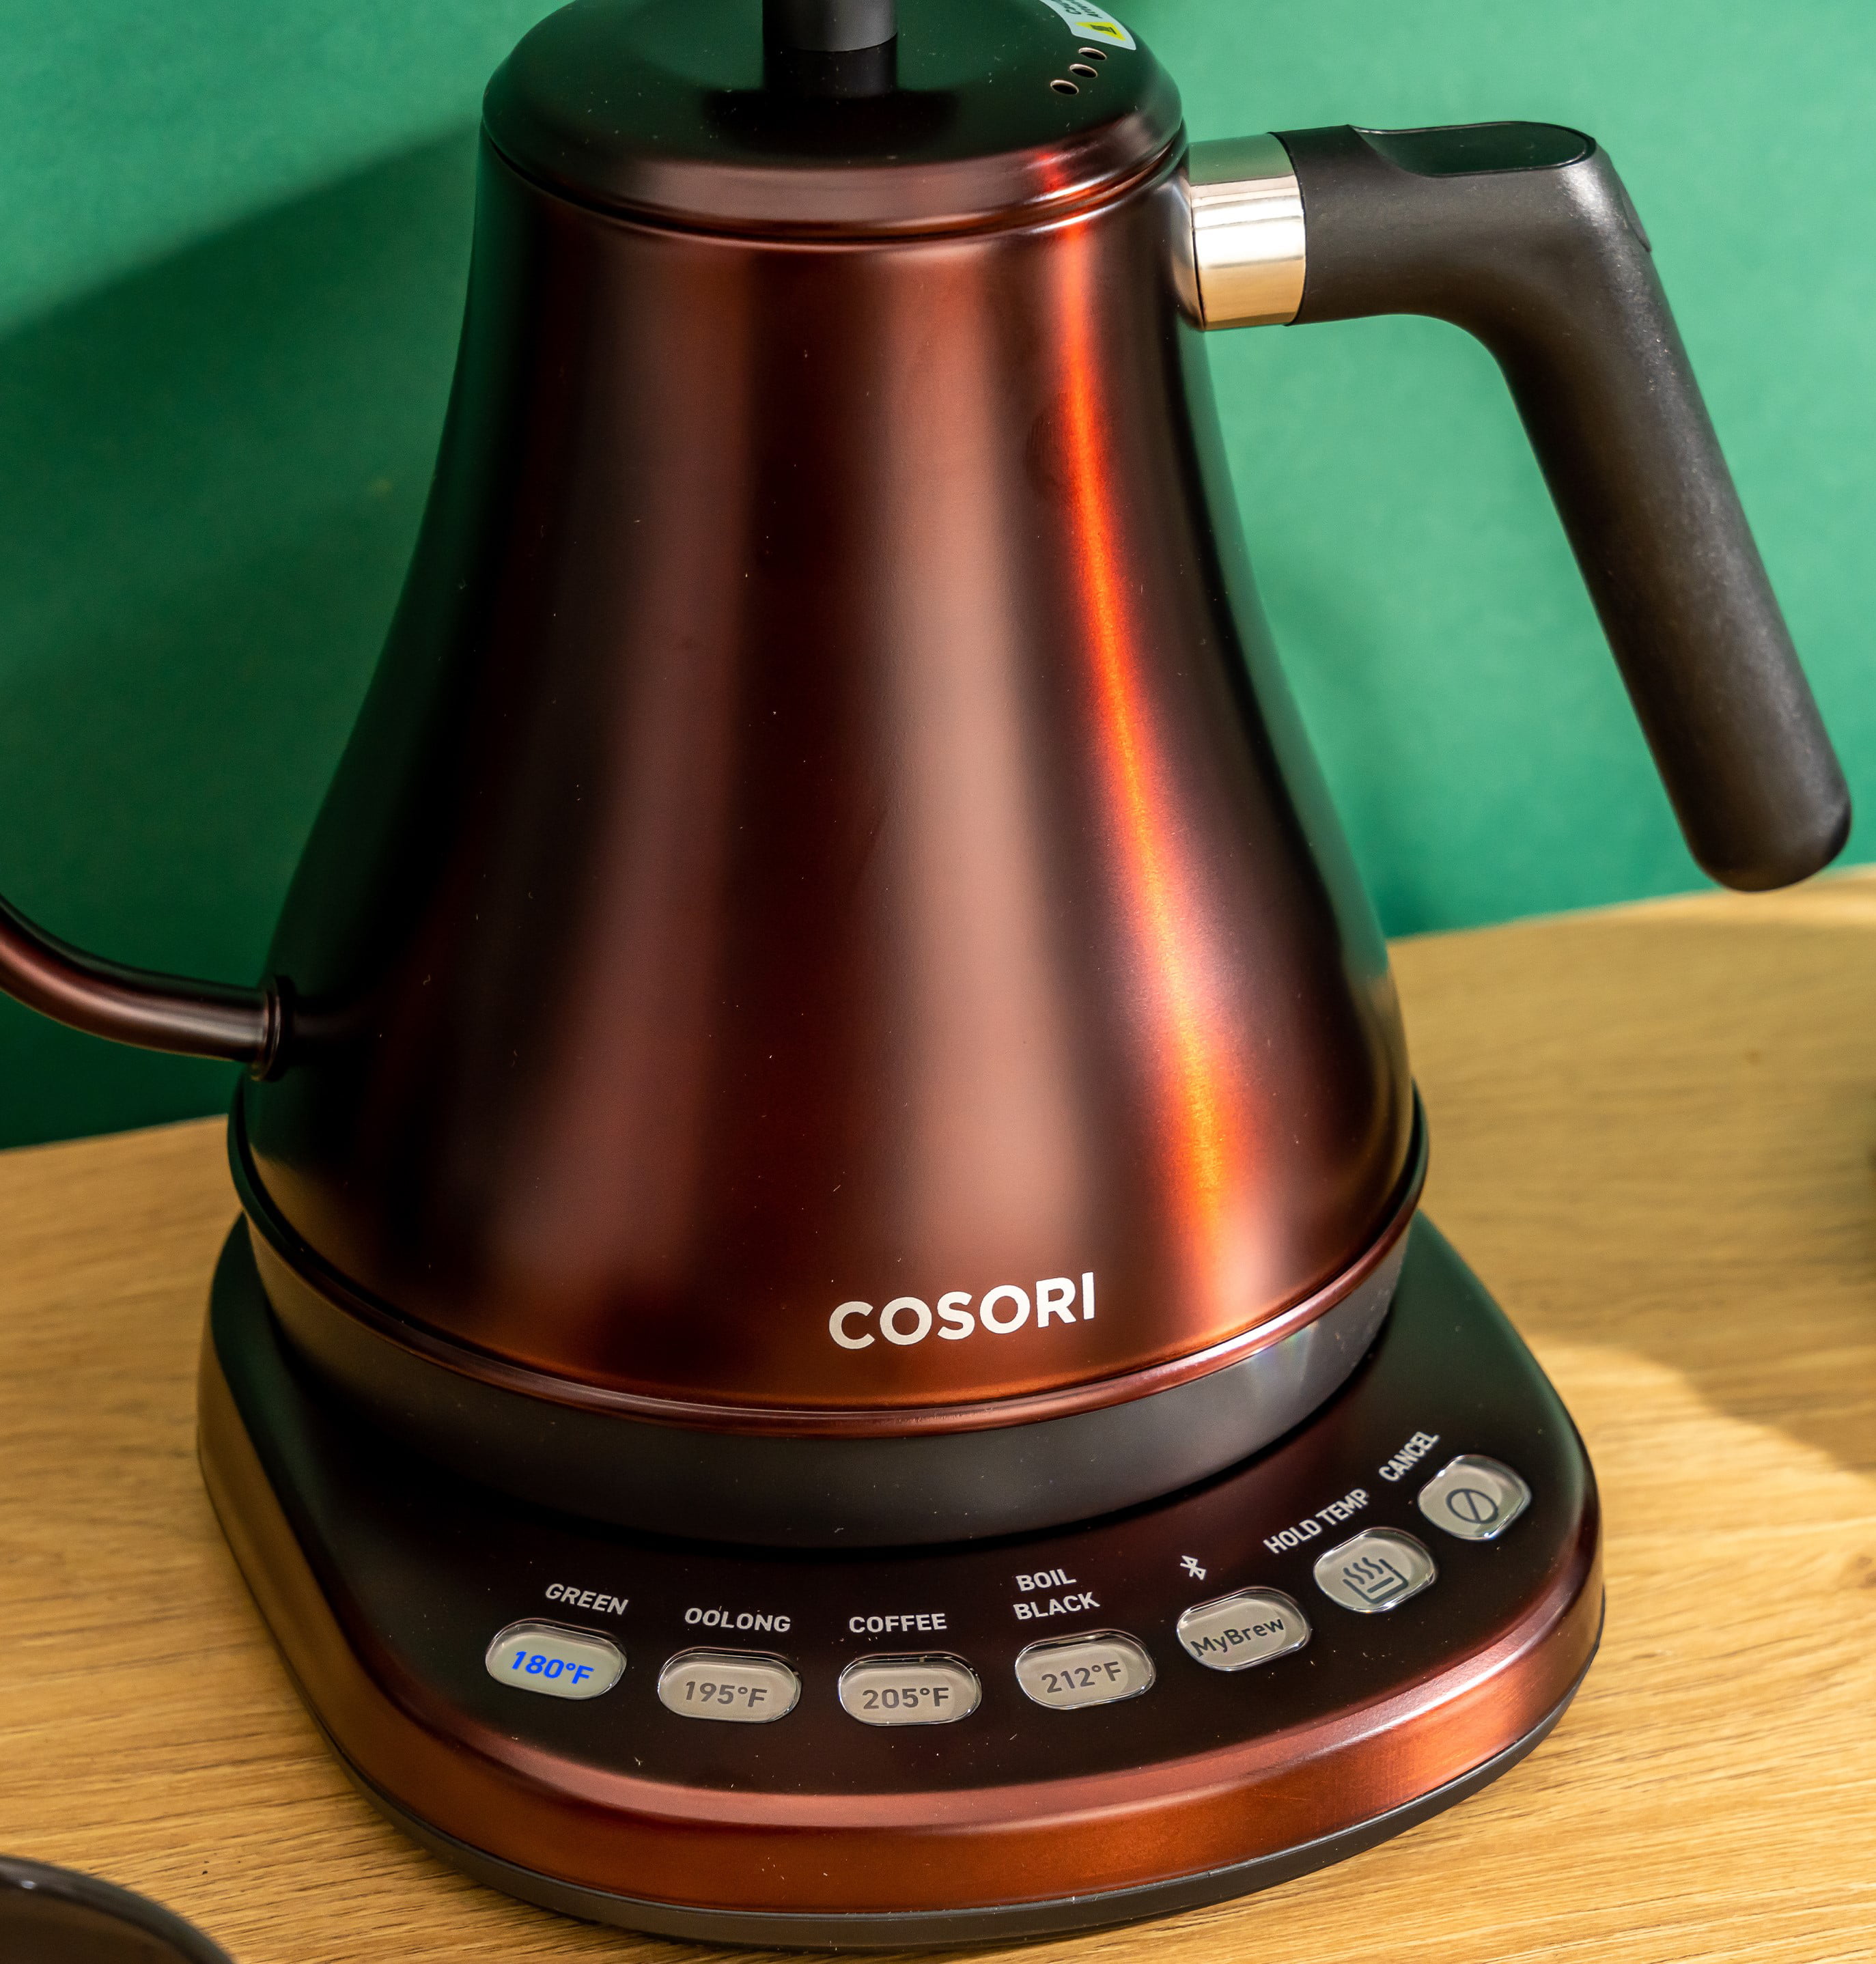 COSORI on Instagram: Looking to become a pour-over coffee master? The  COSORI Original Electric Gooseneck Kettle provides a precise flowing pour  to help you achieve the perfect pour-over brew. #pourover #coffee #morning #